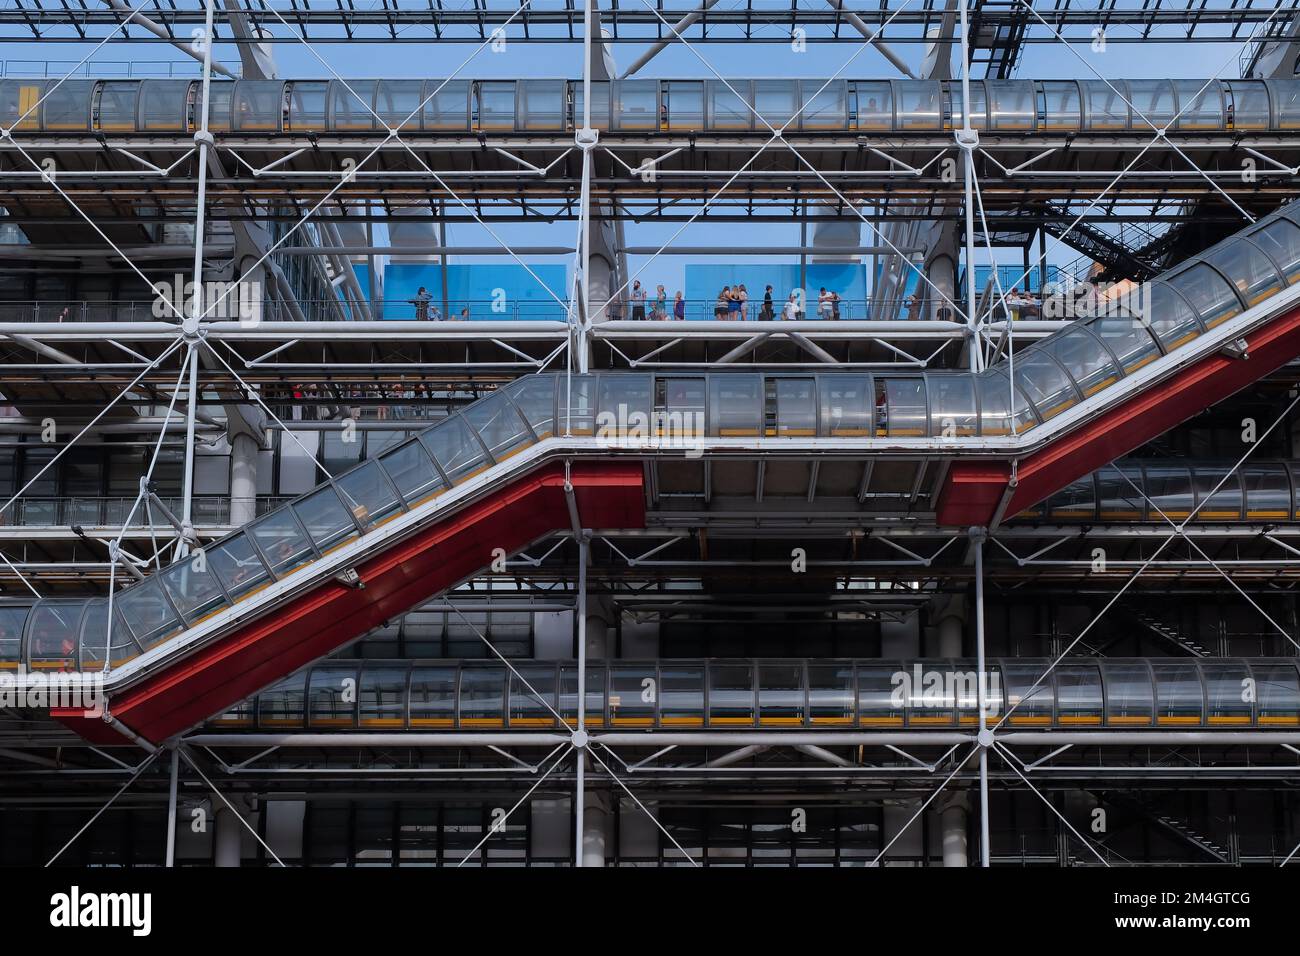 Paris, France - glass and steel exterior of Centre Pompidou. High-tech architecture of National Museum of Modern Art in Europe. Horizontal background. Stock Photo